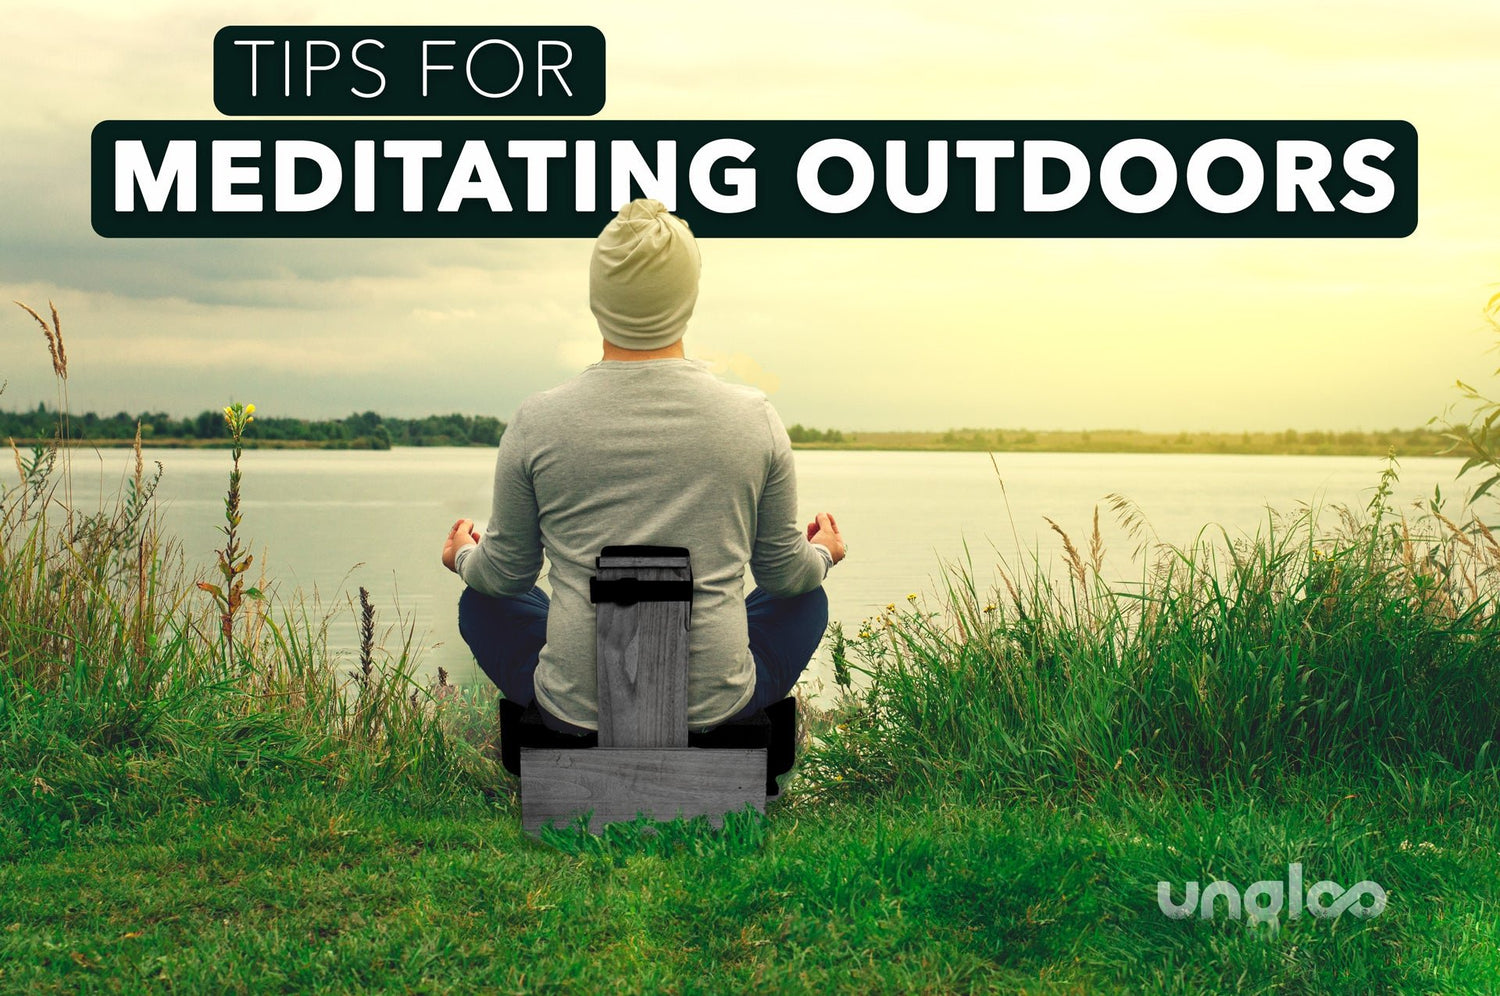 Image of man sitting on an ungloo box meditating outdoors by a lake